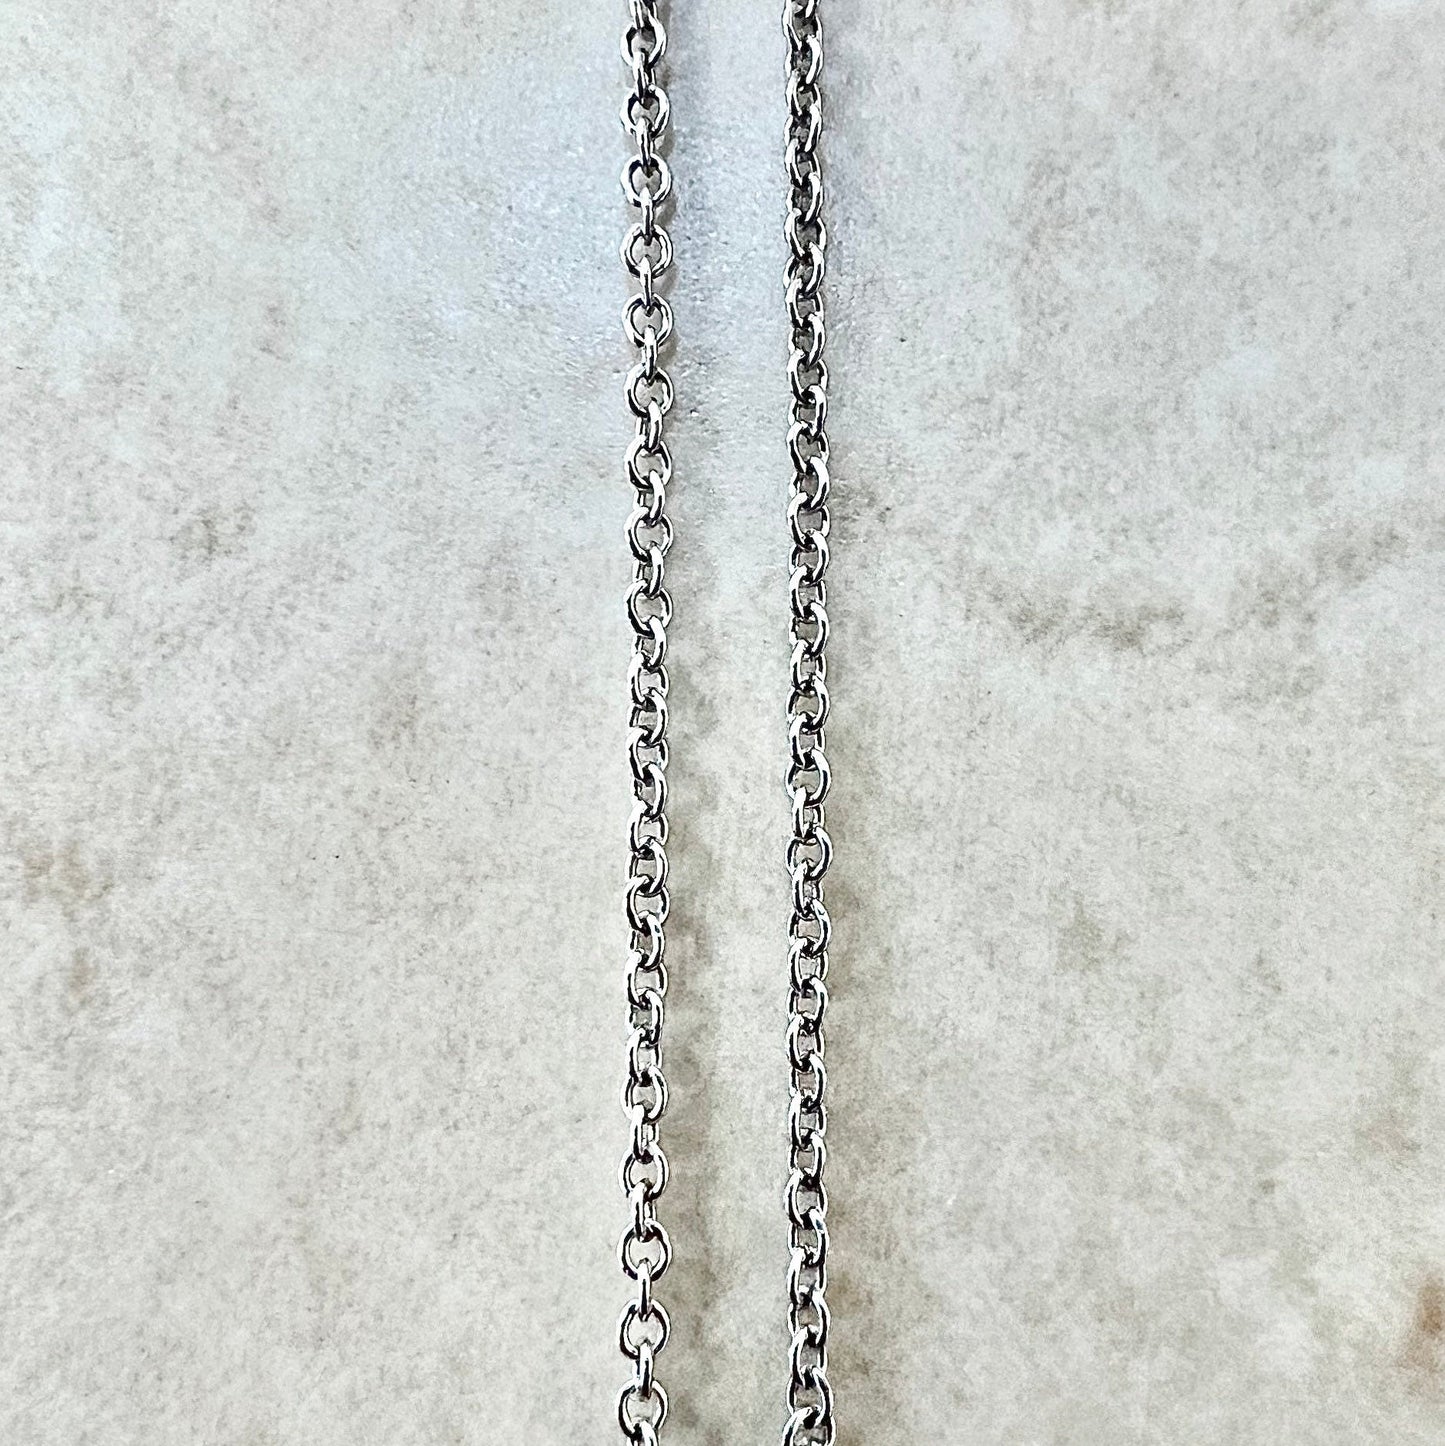 Classic 14K White Gold Cable Chain Necklace - 18” Gold Chain - White Gold Chain Necklace - Gifts For Her - Mother’s Day Gifts - Gift For Mom